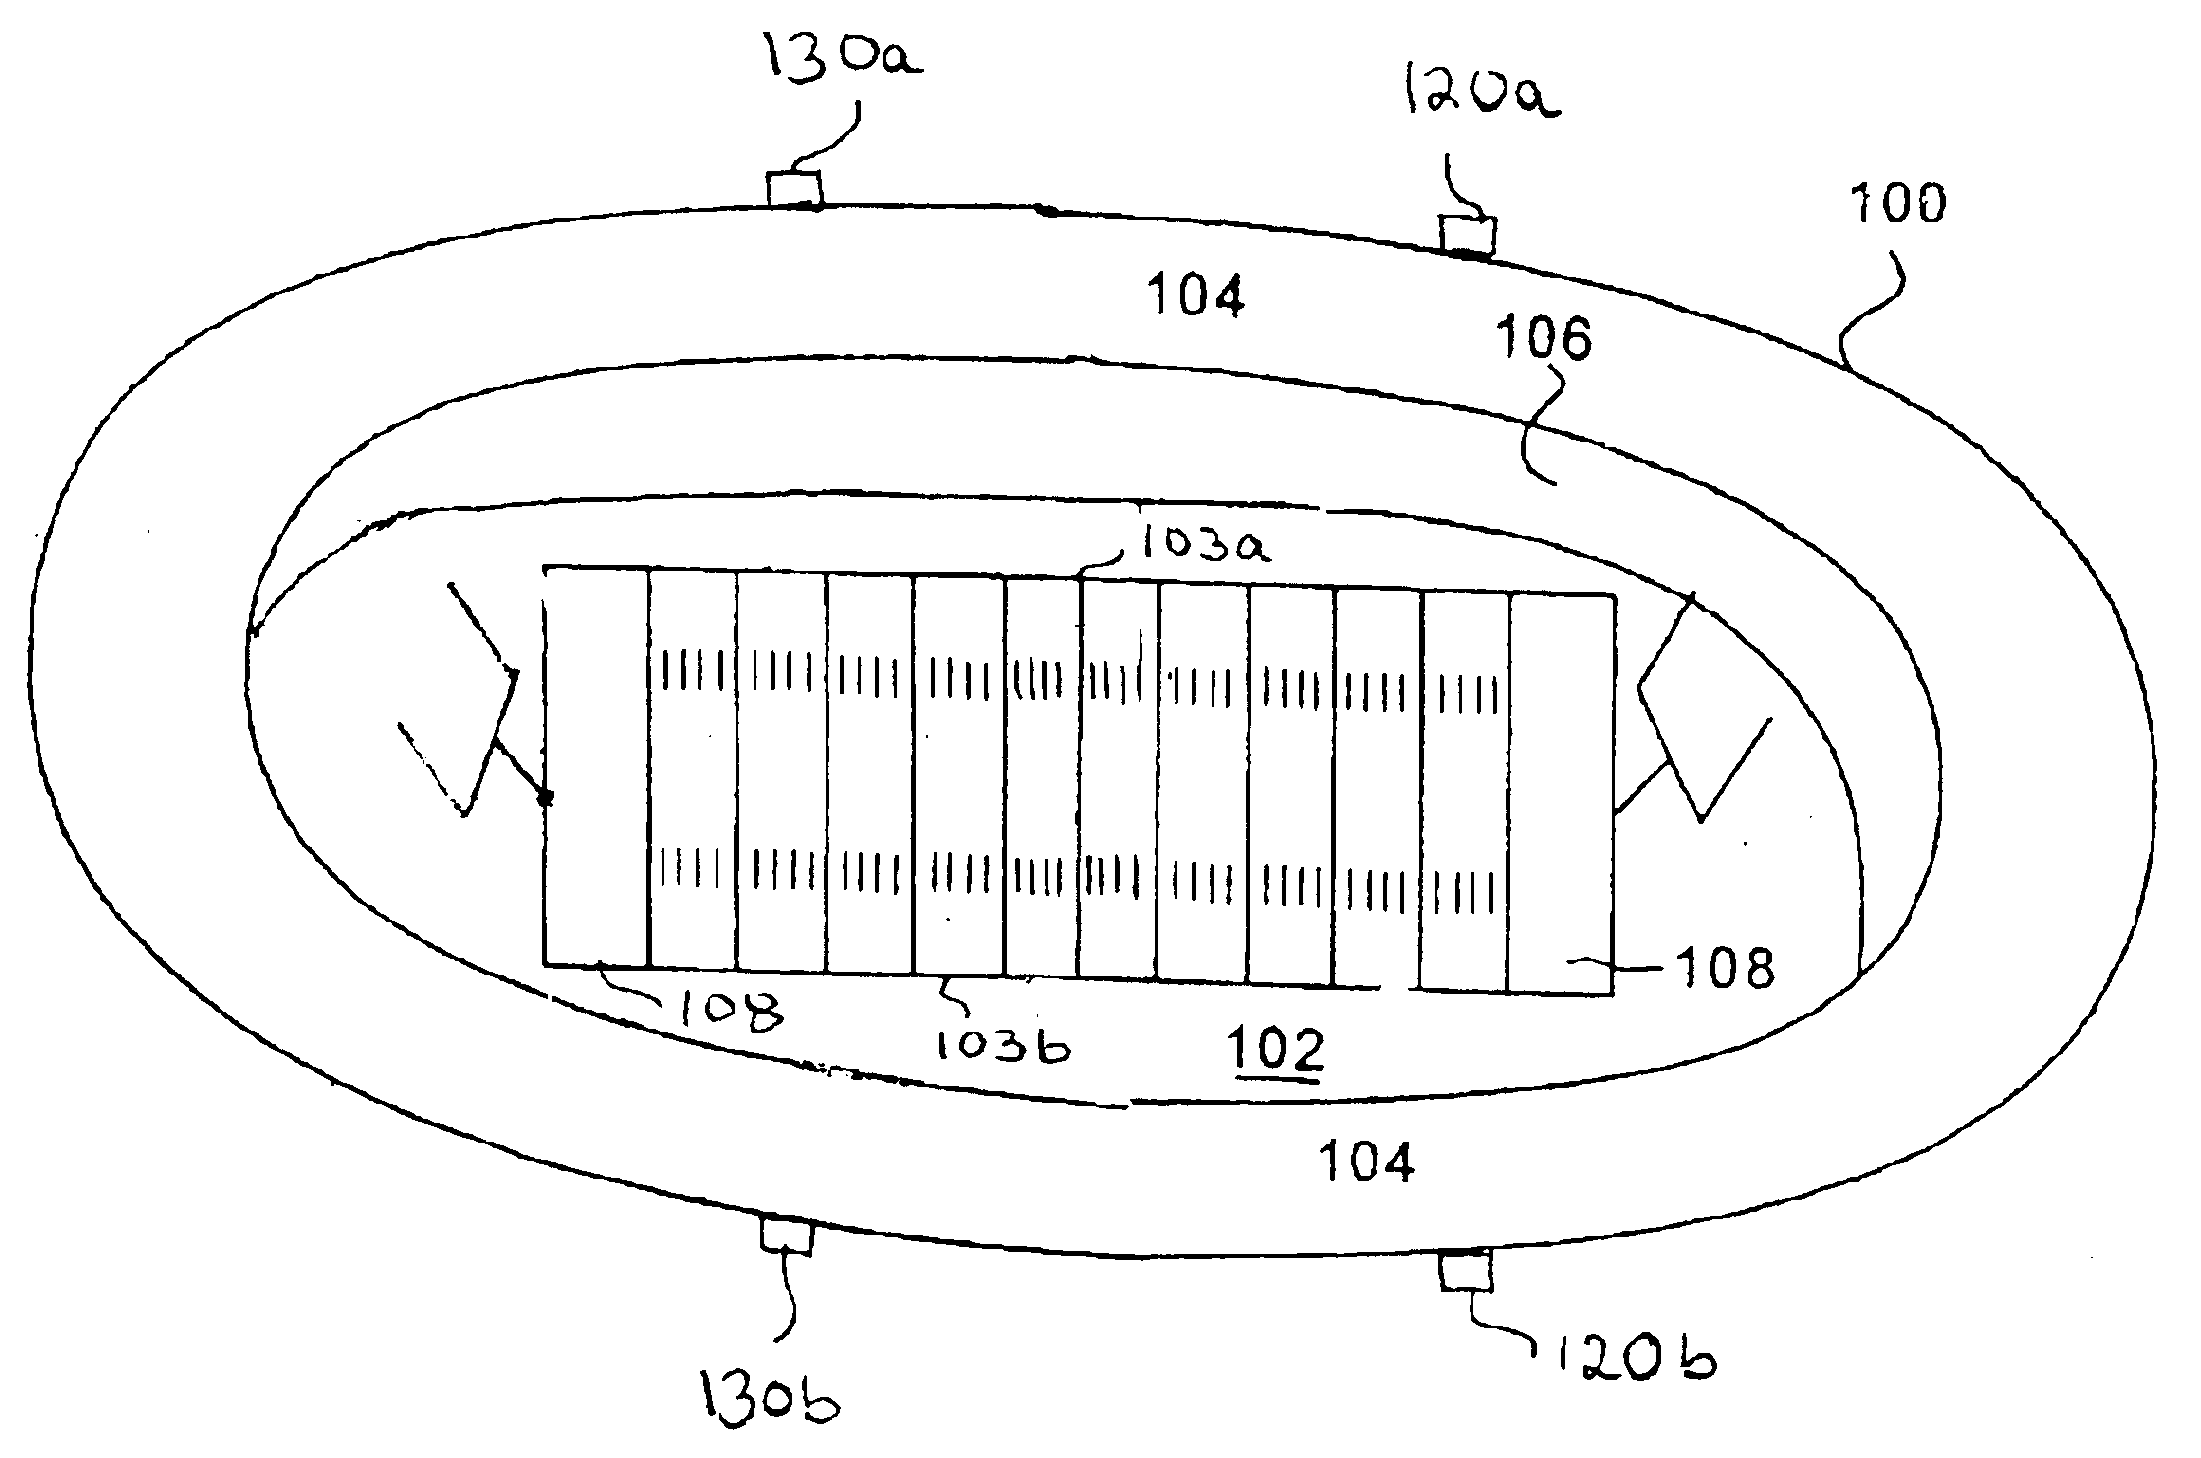 System for operating one or more lasers to project a visible line onto a surface